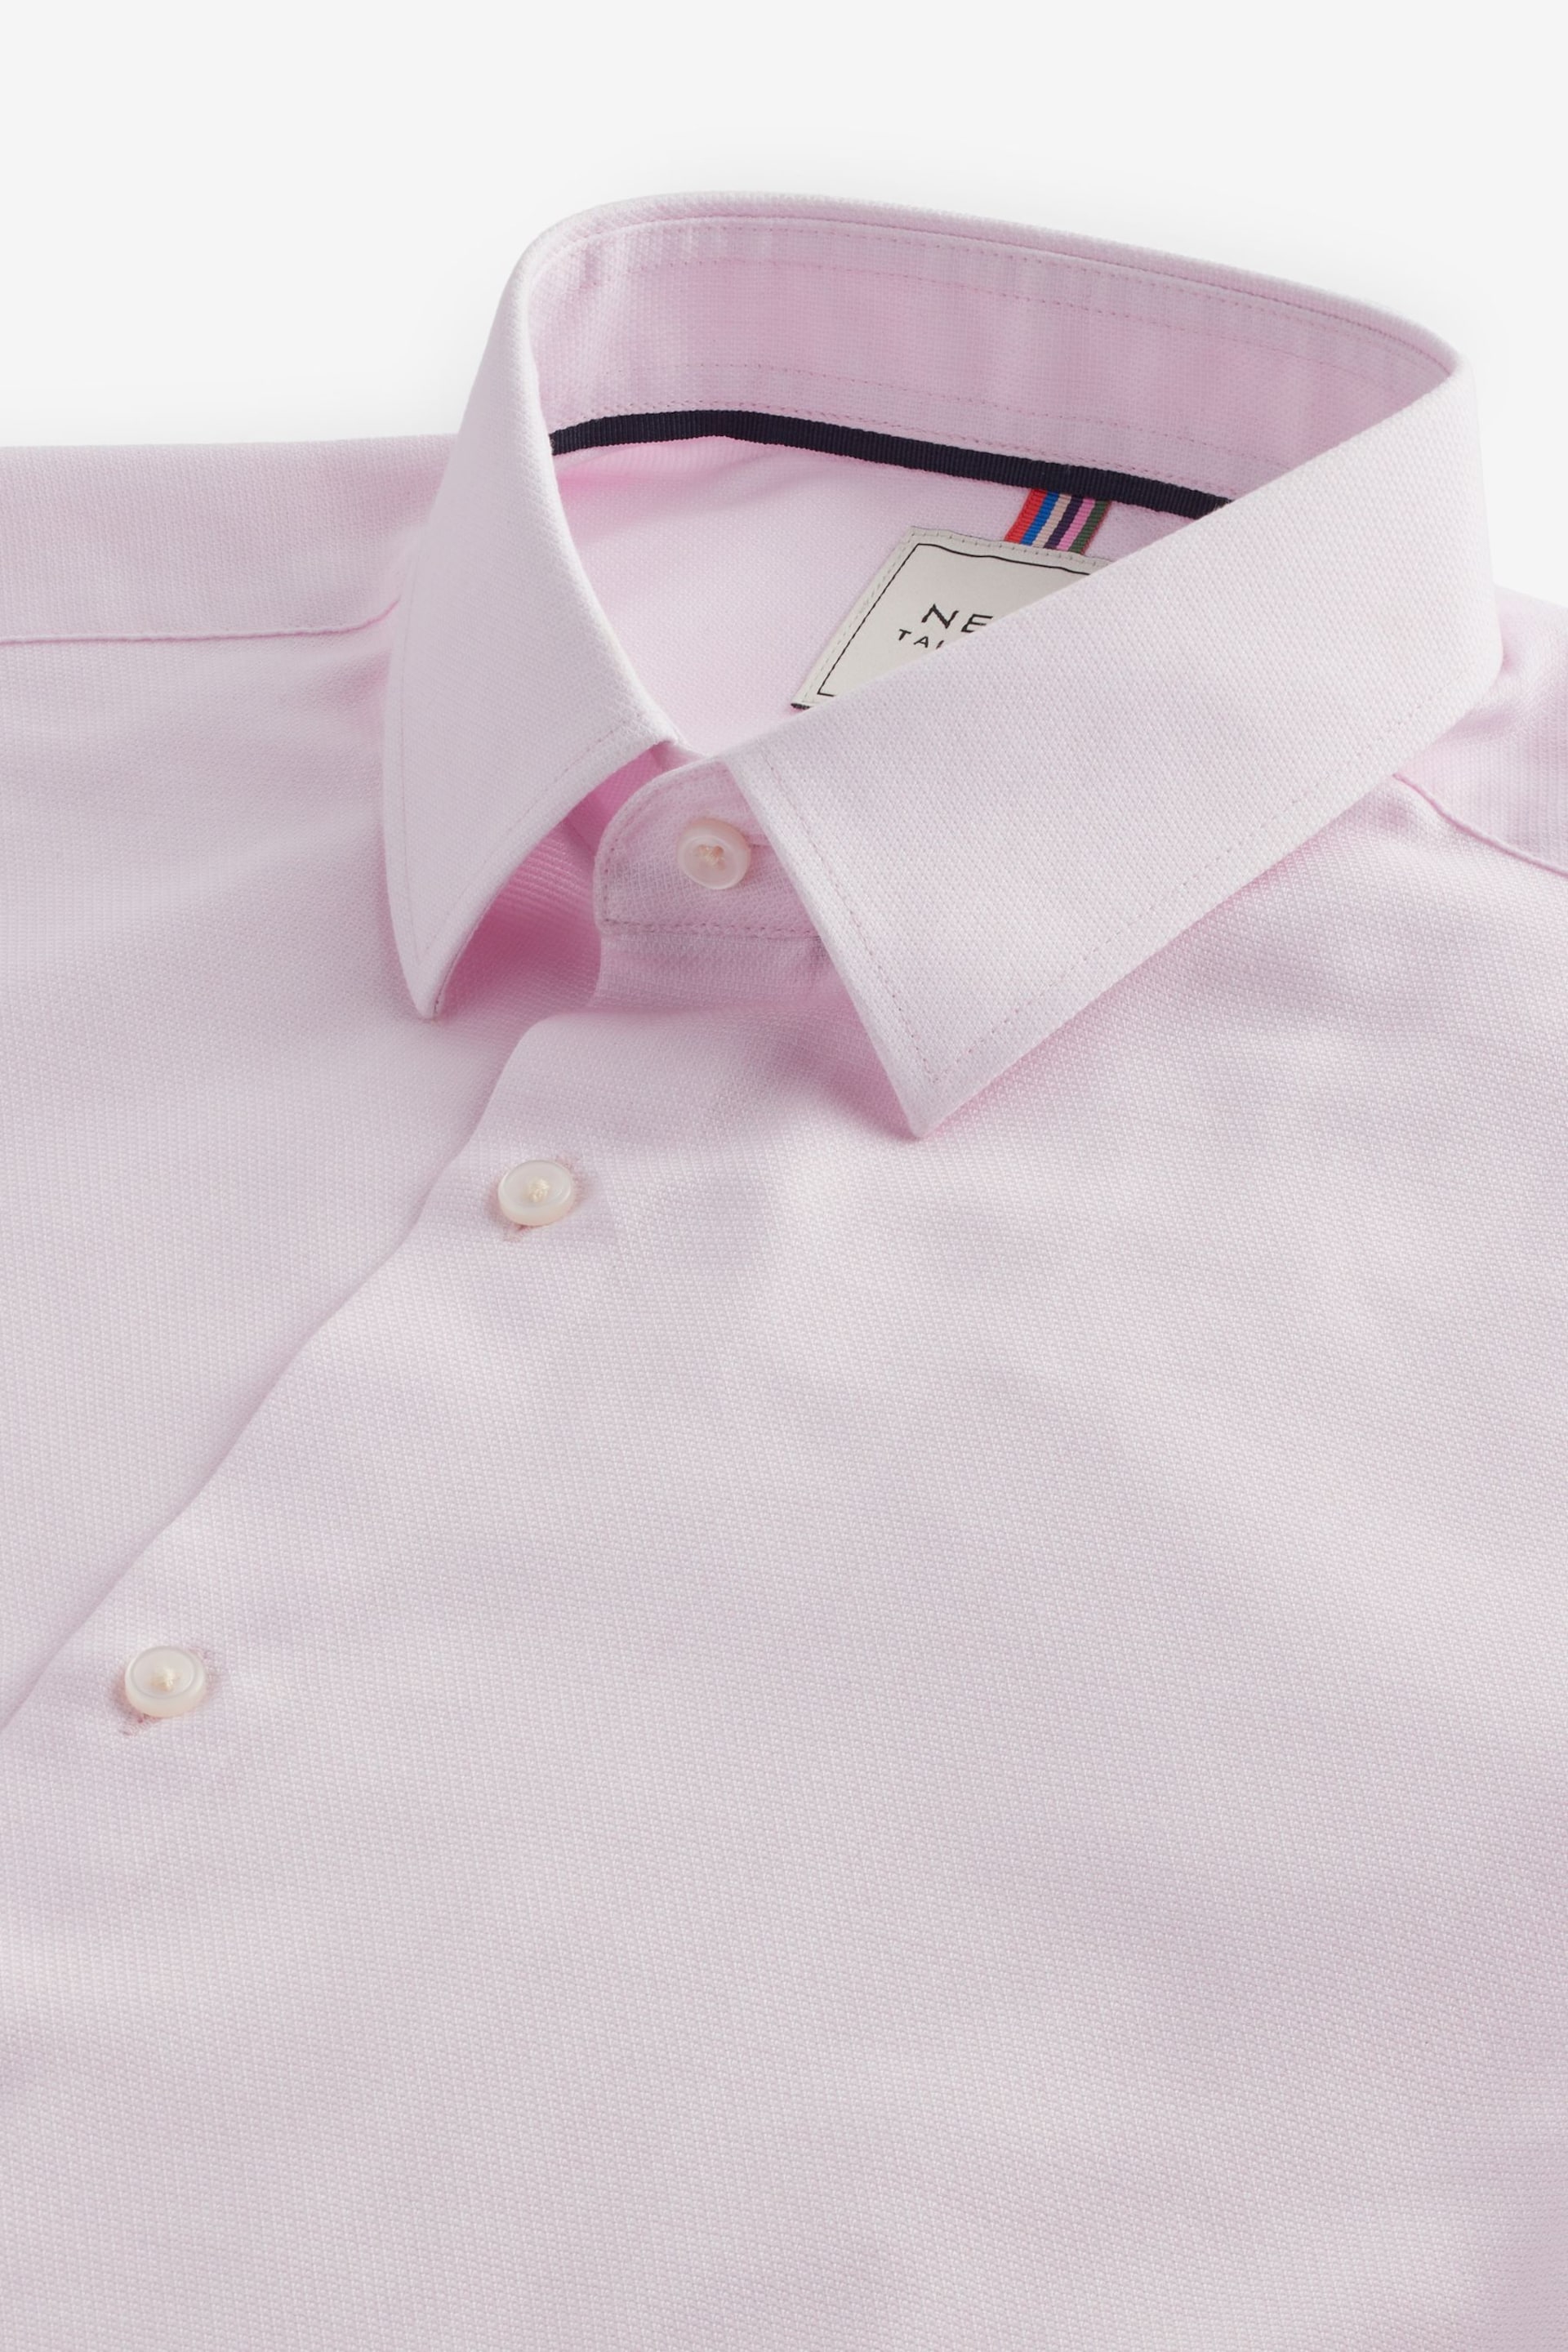 Light Pink Slim Fit Single Cuff Easy Care Textured Shirt - Image 6 of 6